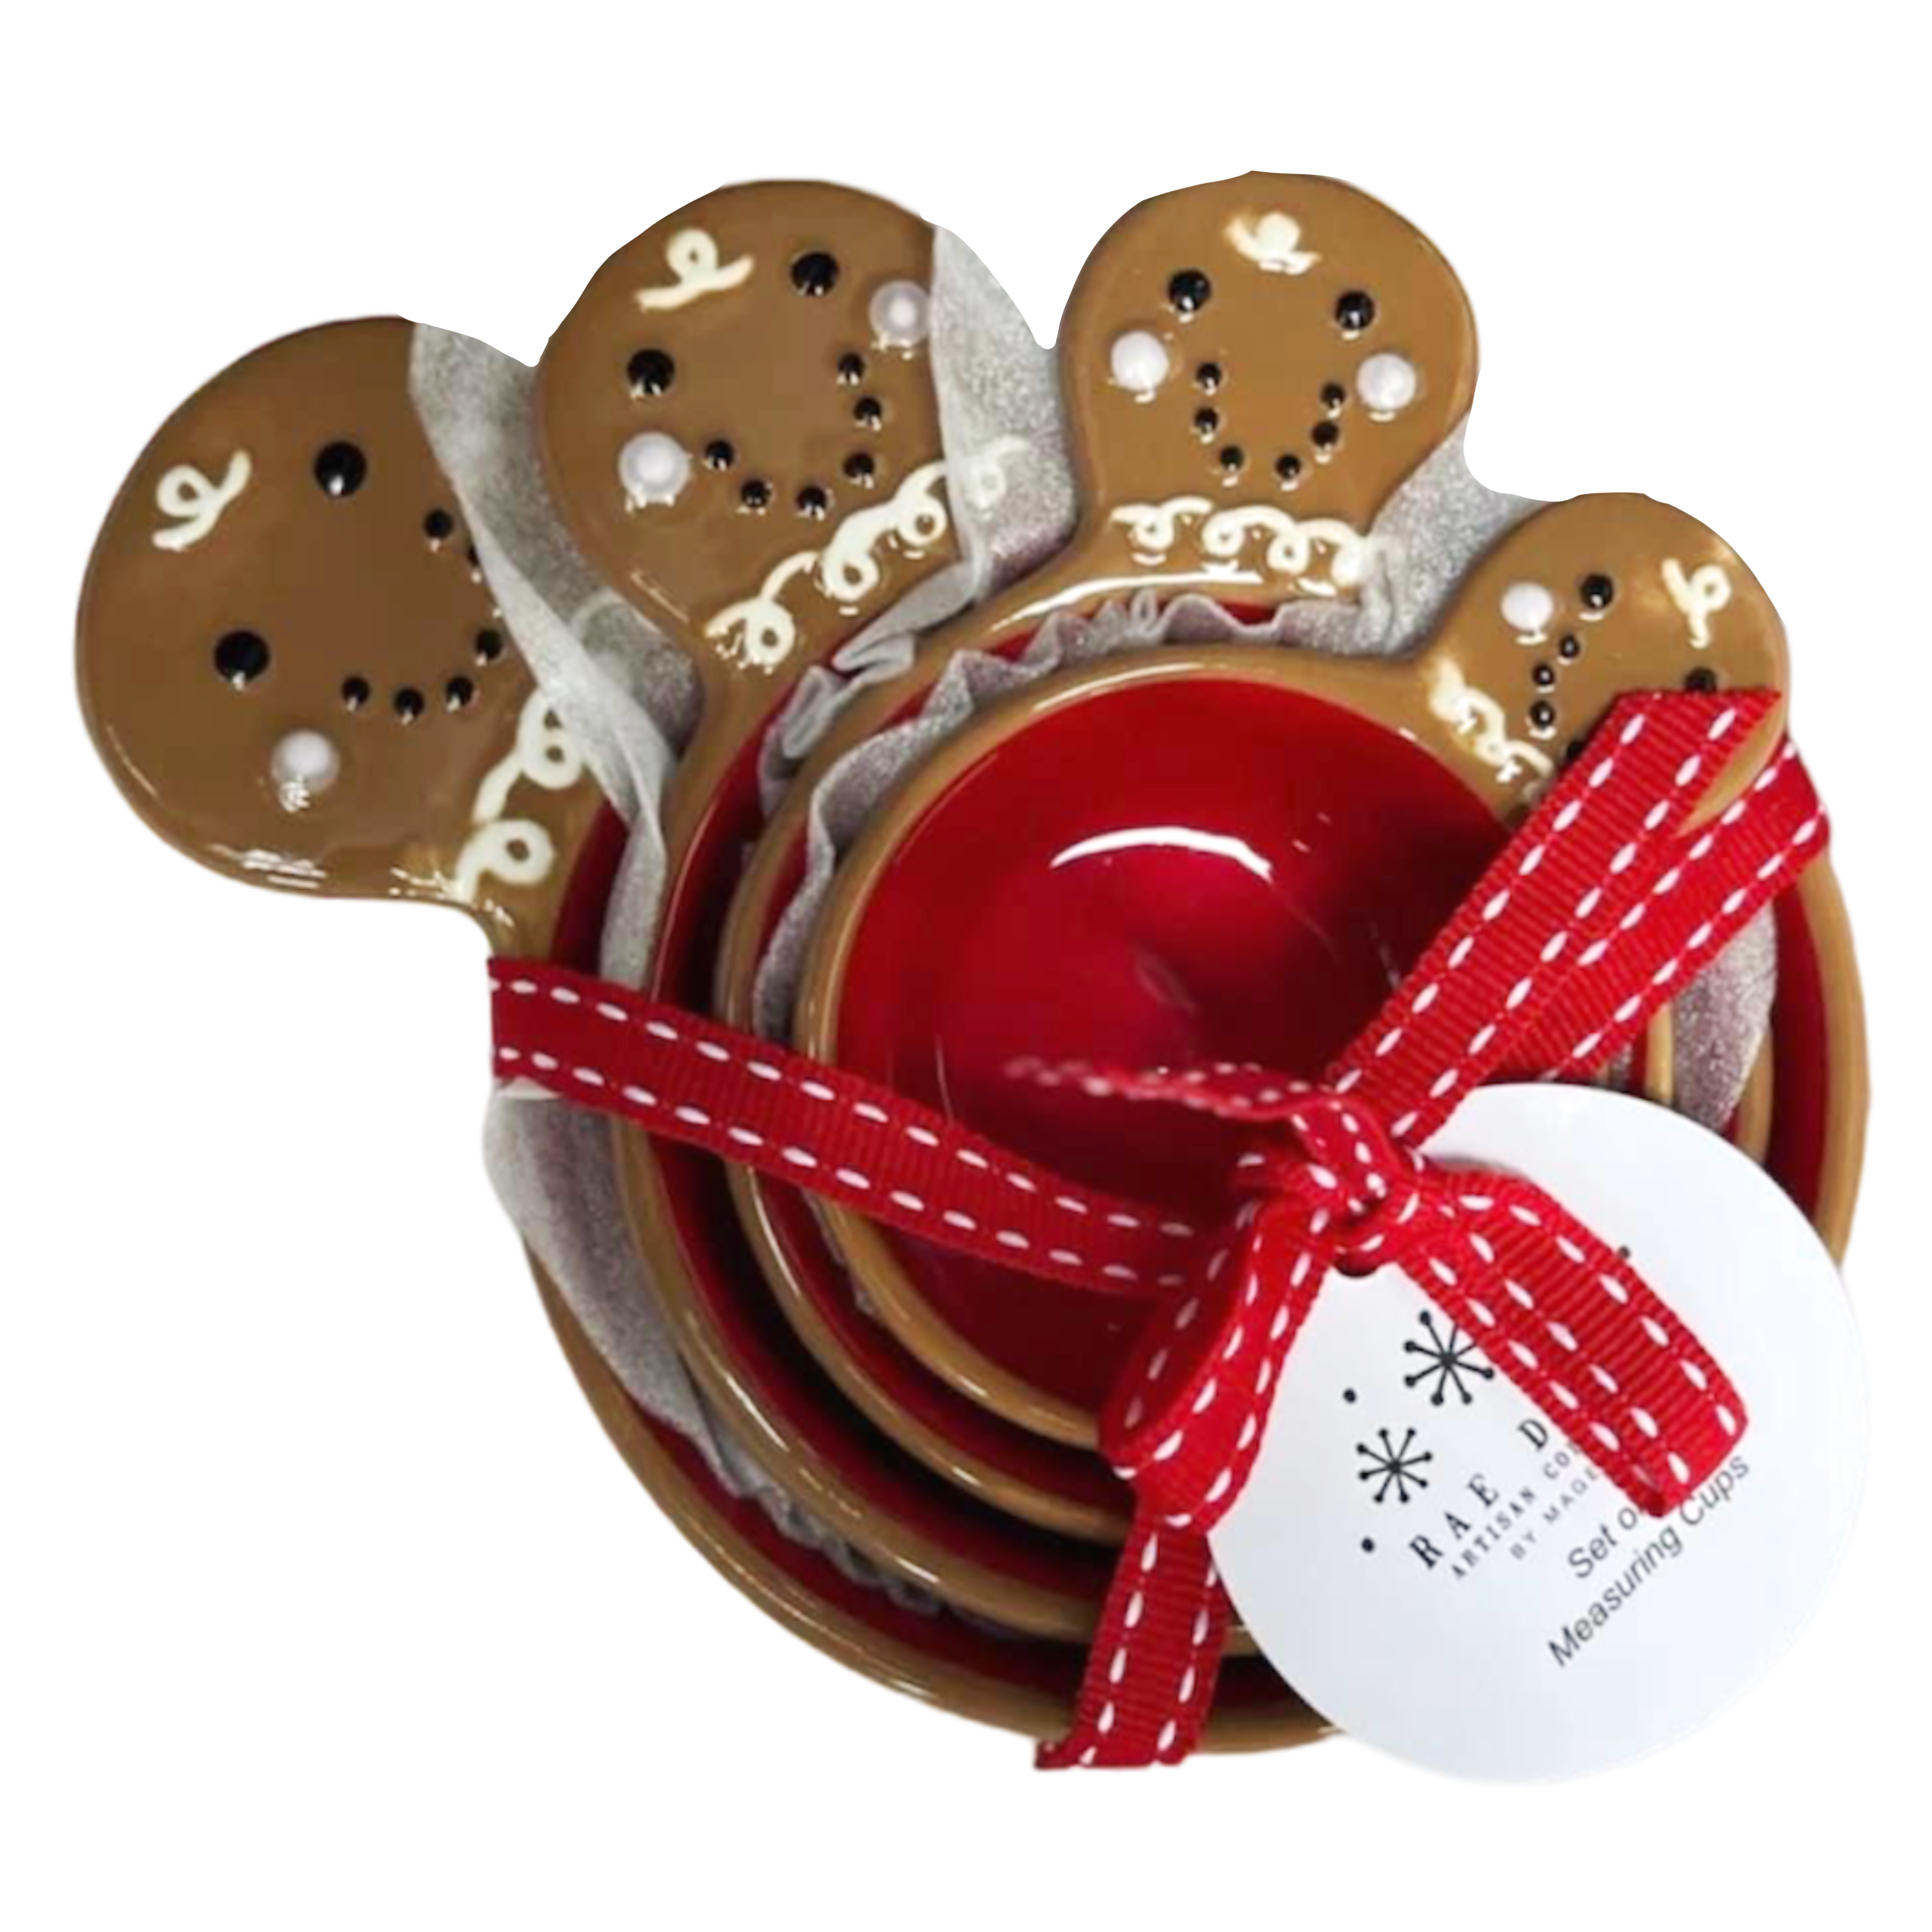 Rae Dunn Christmas Snowman and Peppermint, Gingerbread Measuring Cups-click  on the Drop Down Menu and Select 